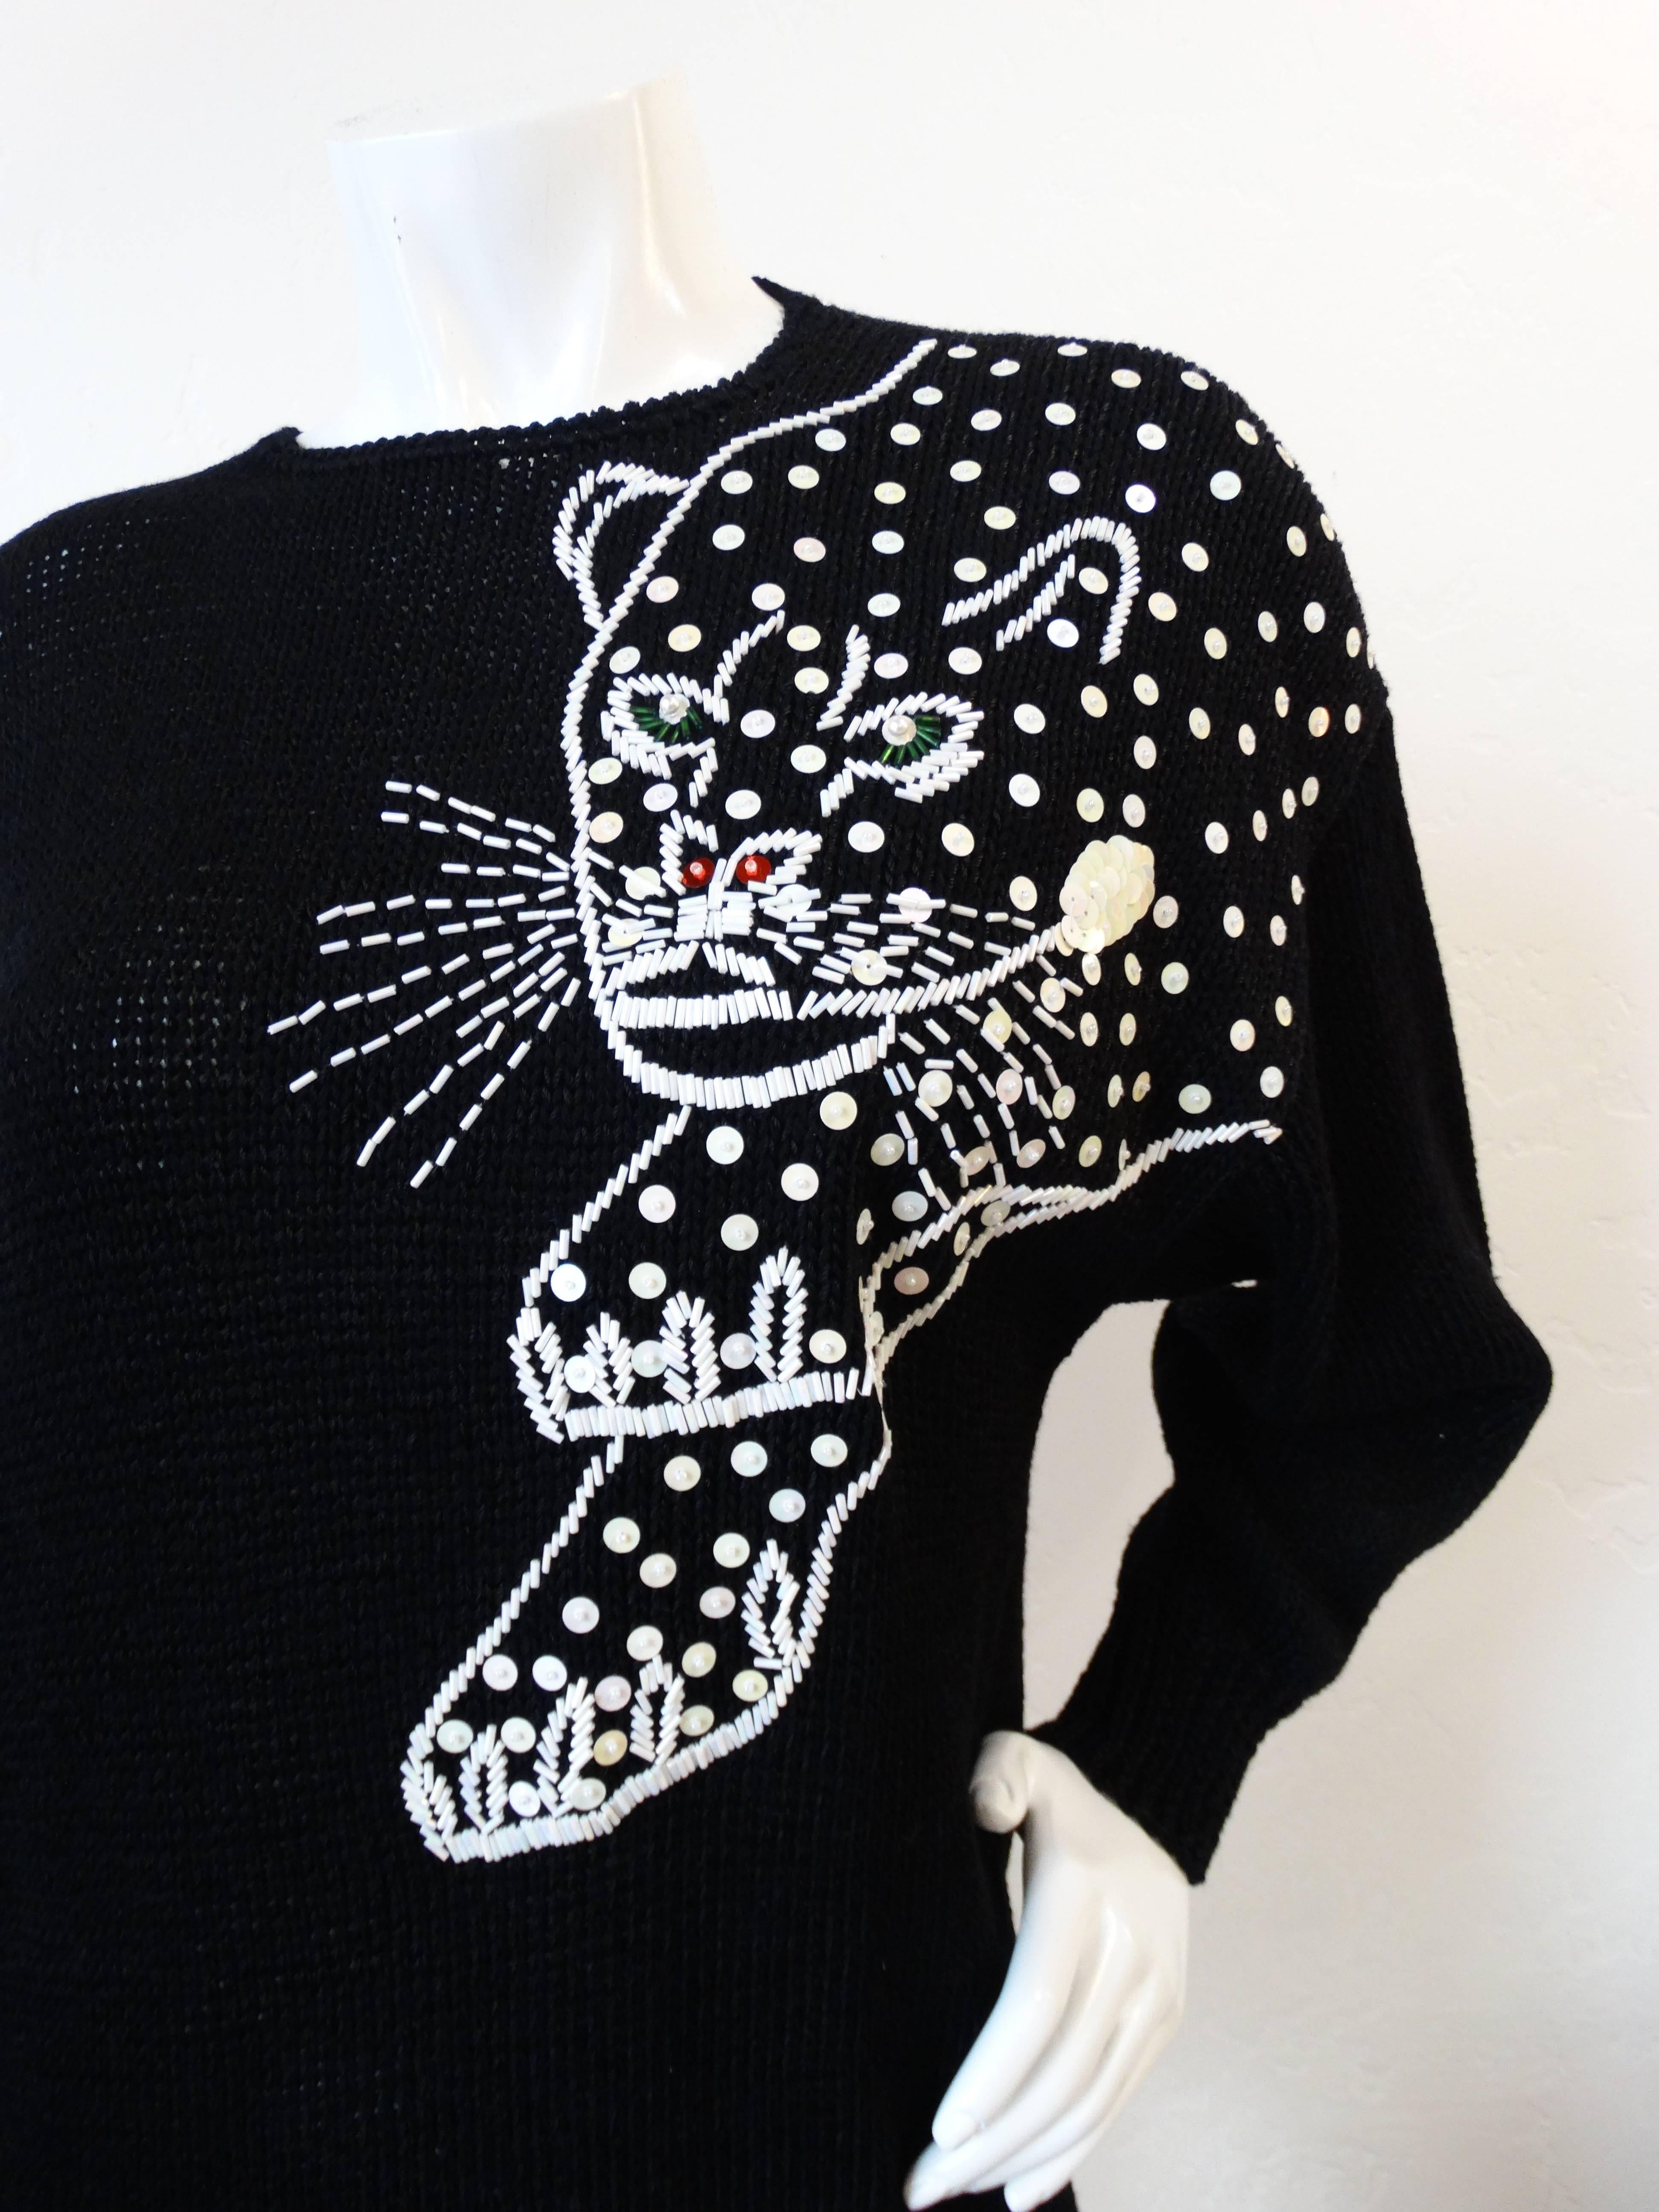 The best of 1980s style in one piece: jungle cat motifs and sequins! Soft solid black knit sweater with a flattering dolman style fit. Jaguar motif on the left shoulder made up of little iridescent sequins and beads.  Elasticized banded waist and